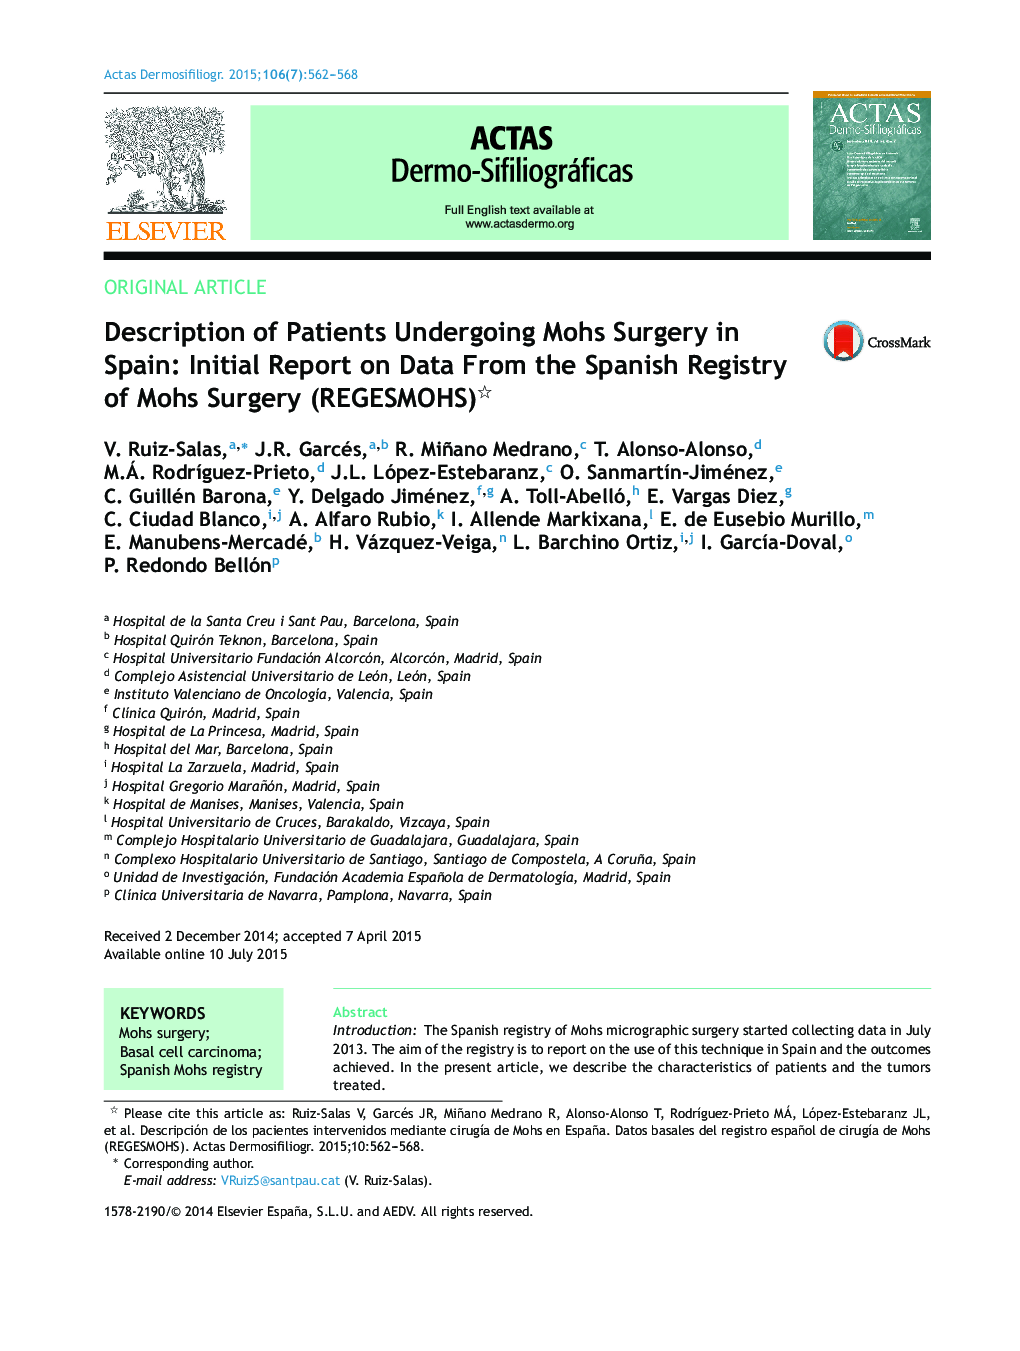 Description of Patients Undergoing Mohs Surgery in Spain: Initial Report on Data From the Spanish Registry of Mohs Surgery (REGESMOHS) 